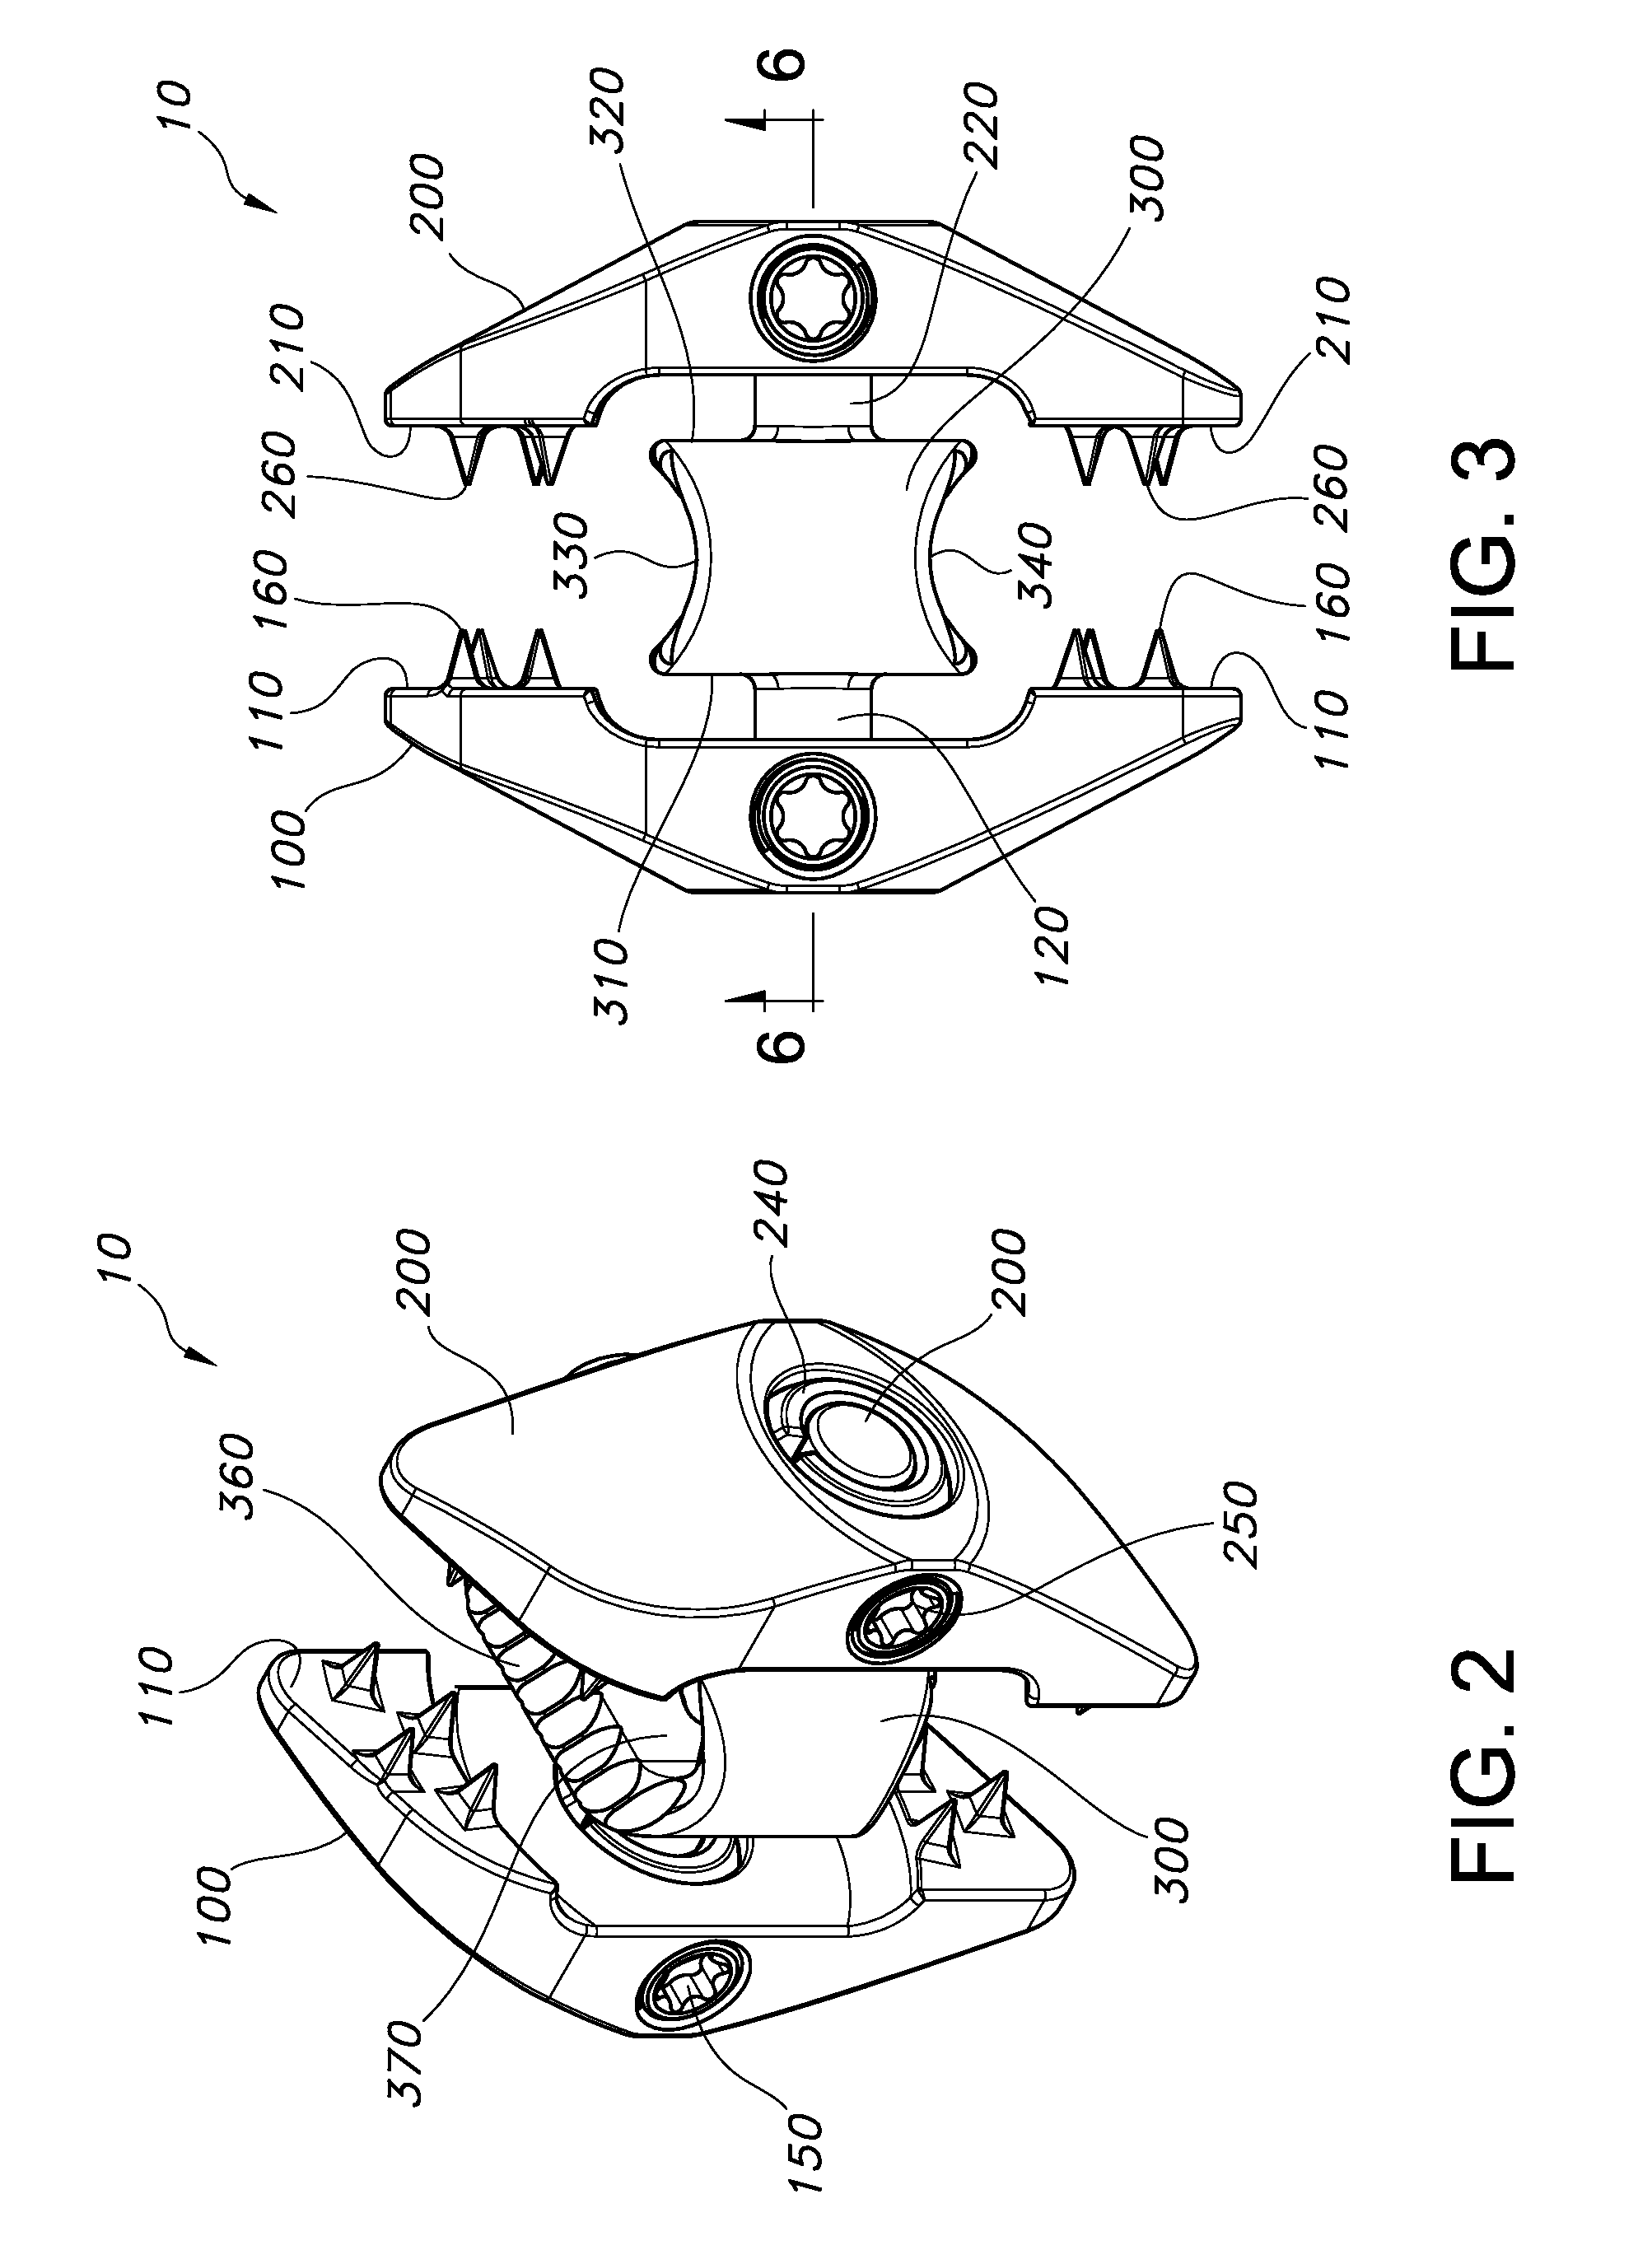 Spinous process fixation apparatus and method